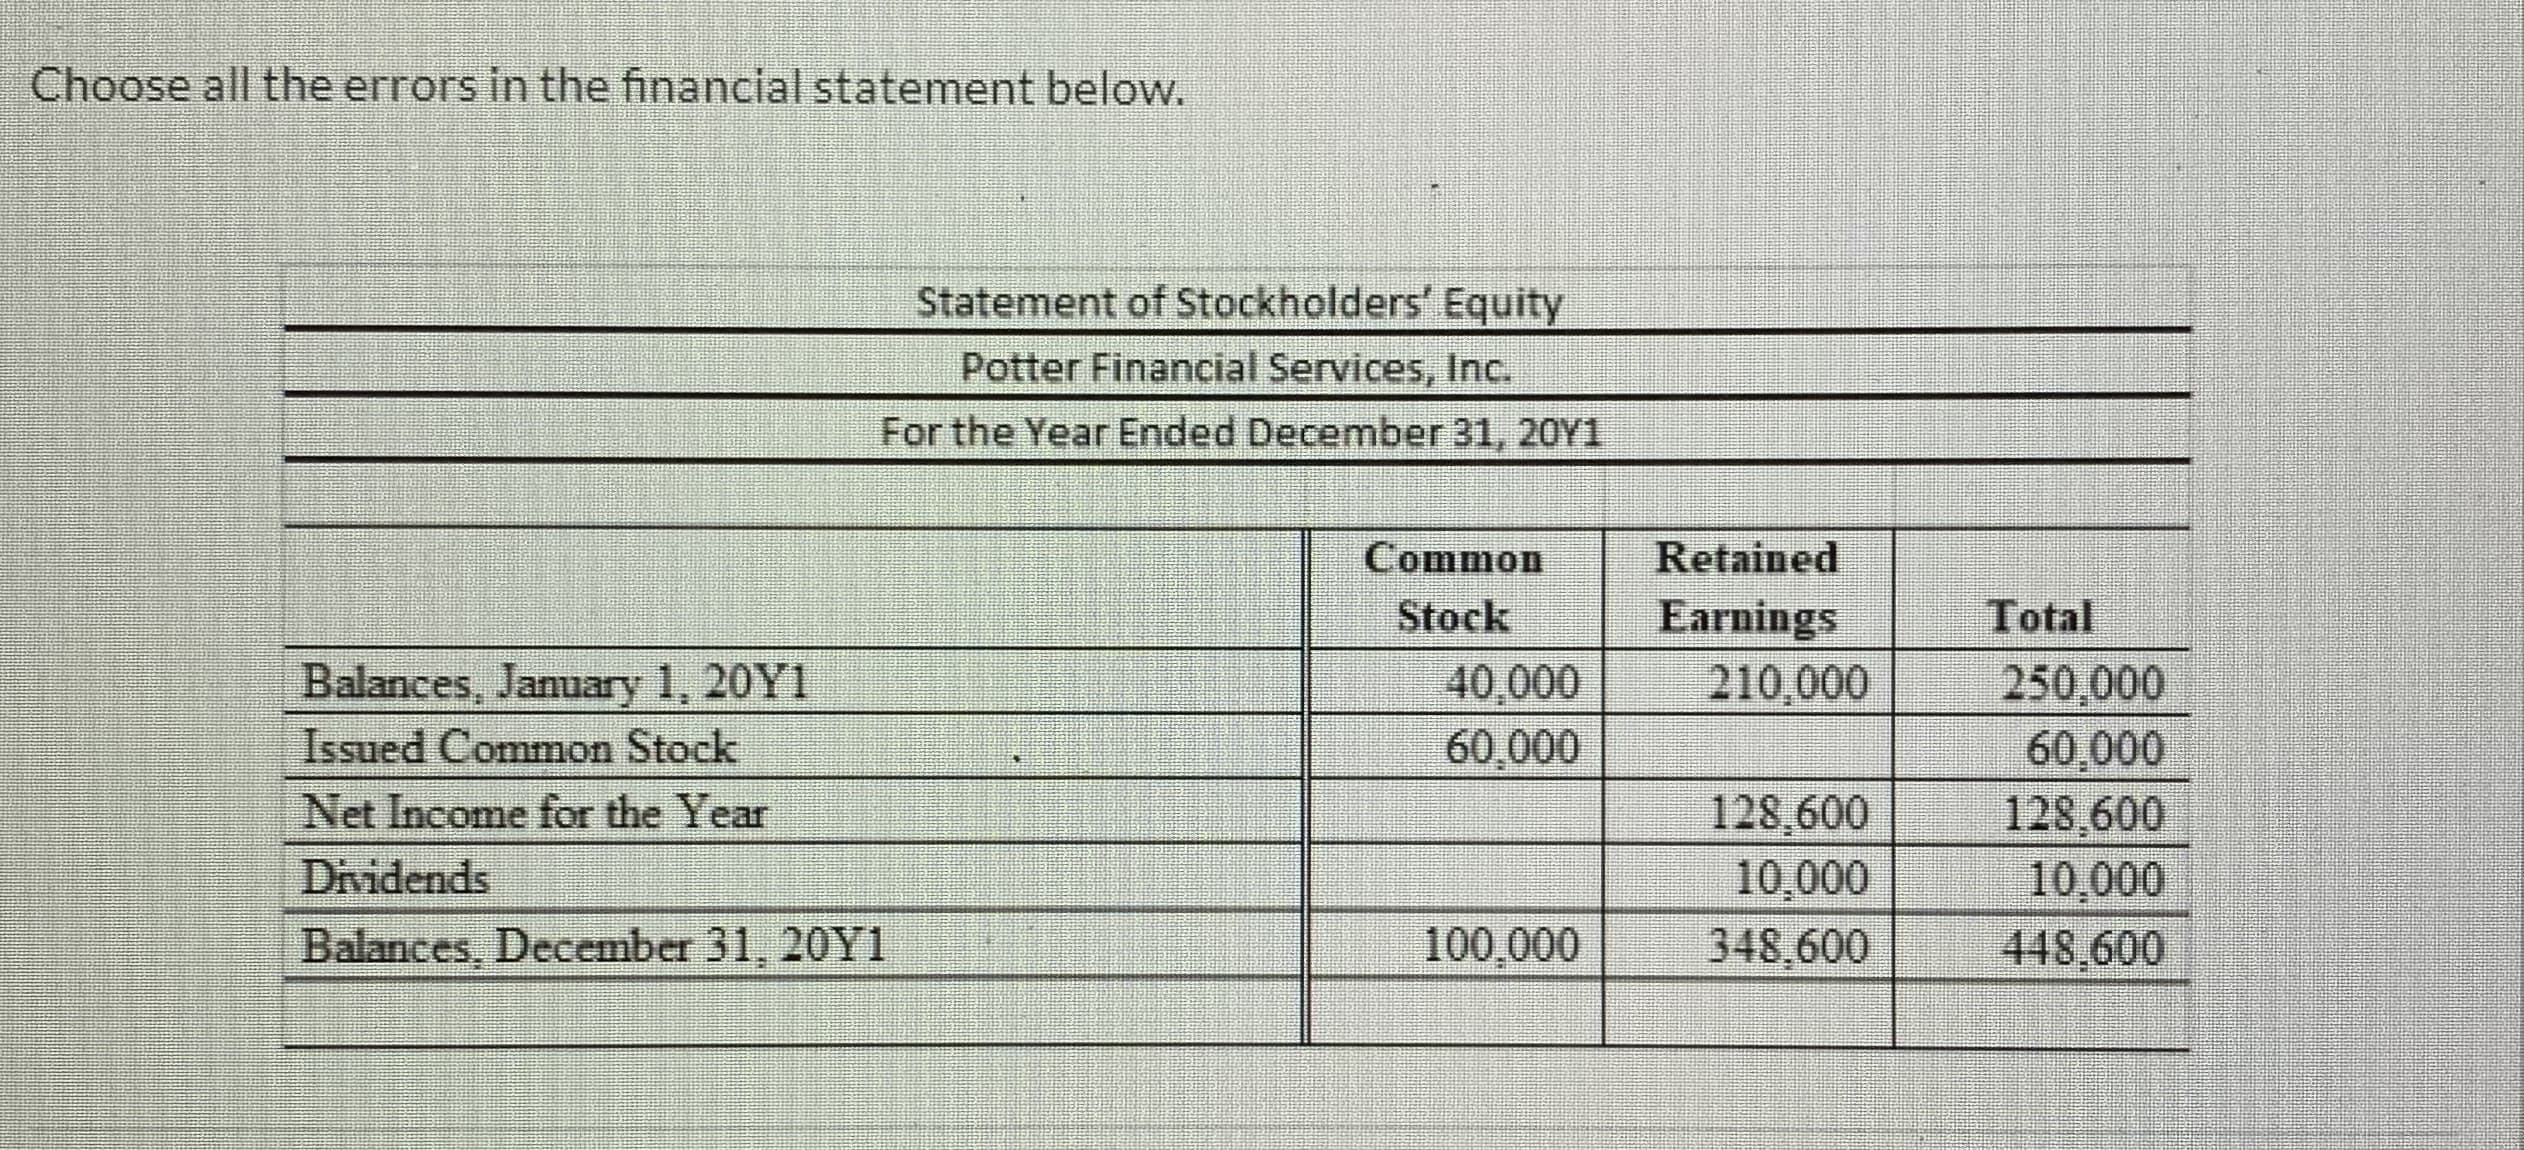 Statement of Stockholders' Equity
Potter Financial Services, Inc.
For the Year Ended December 31, 20Y1
Common
Retained
Stock
Earnings
210,000
Total
Balances, January 1, 20Y1
Issued Common Stock
40,000
250,000
60,000
128,600
10,000
448,600
60,000
128,600
10,000
348,600
Net Income for the Year
Dividends
Balances, December 31, 20Y1
100,000
